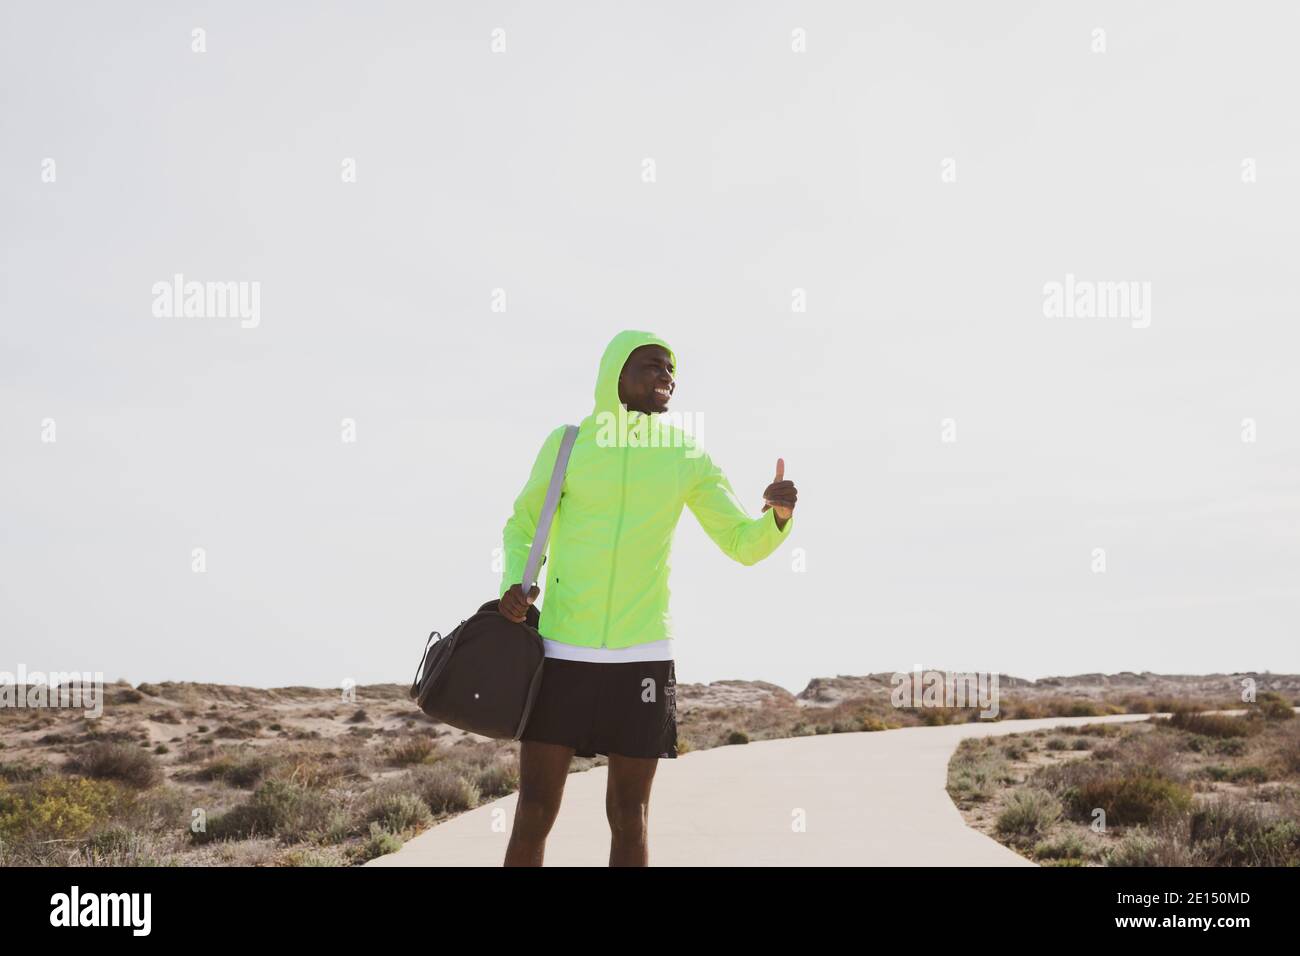 Young black runner with bag and yellow rain jacket who waves as he arrives to train. Stock Photo